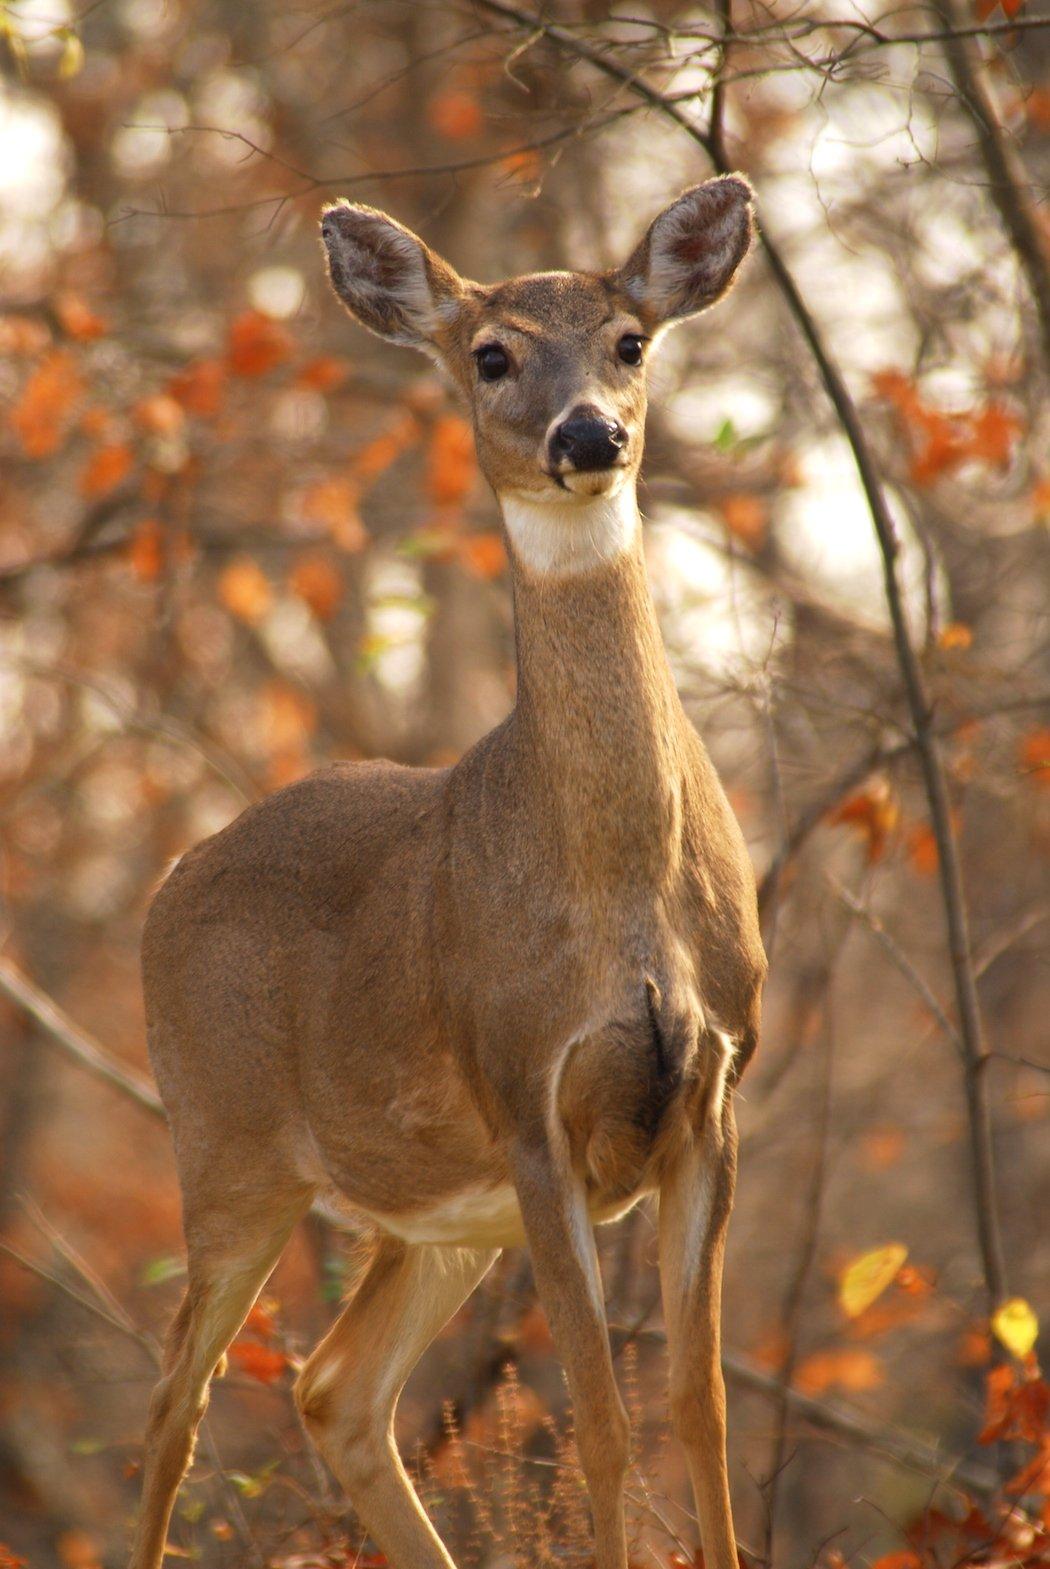 Whitetails need early successional habitat to thrive. (Richard Hines photo)